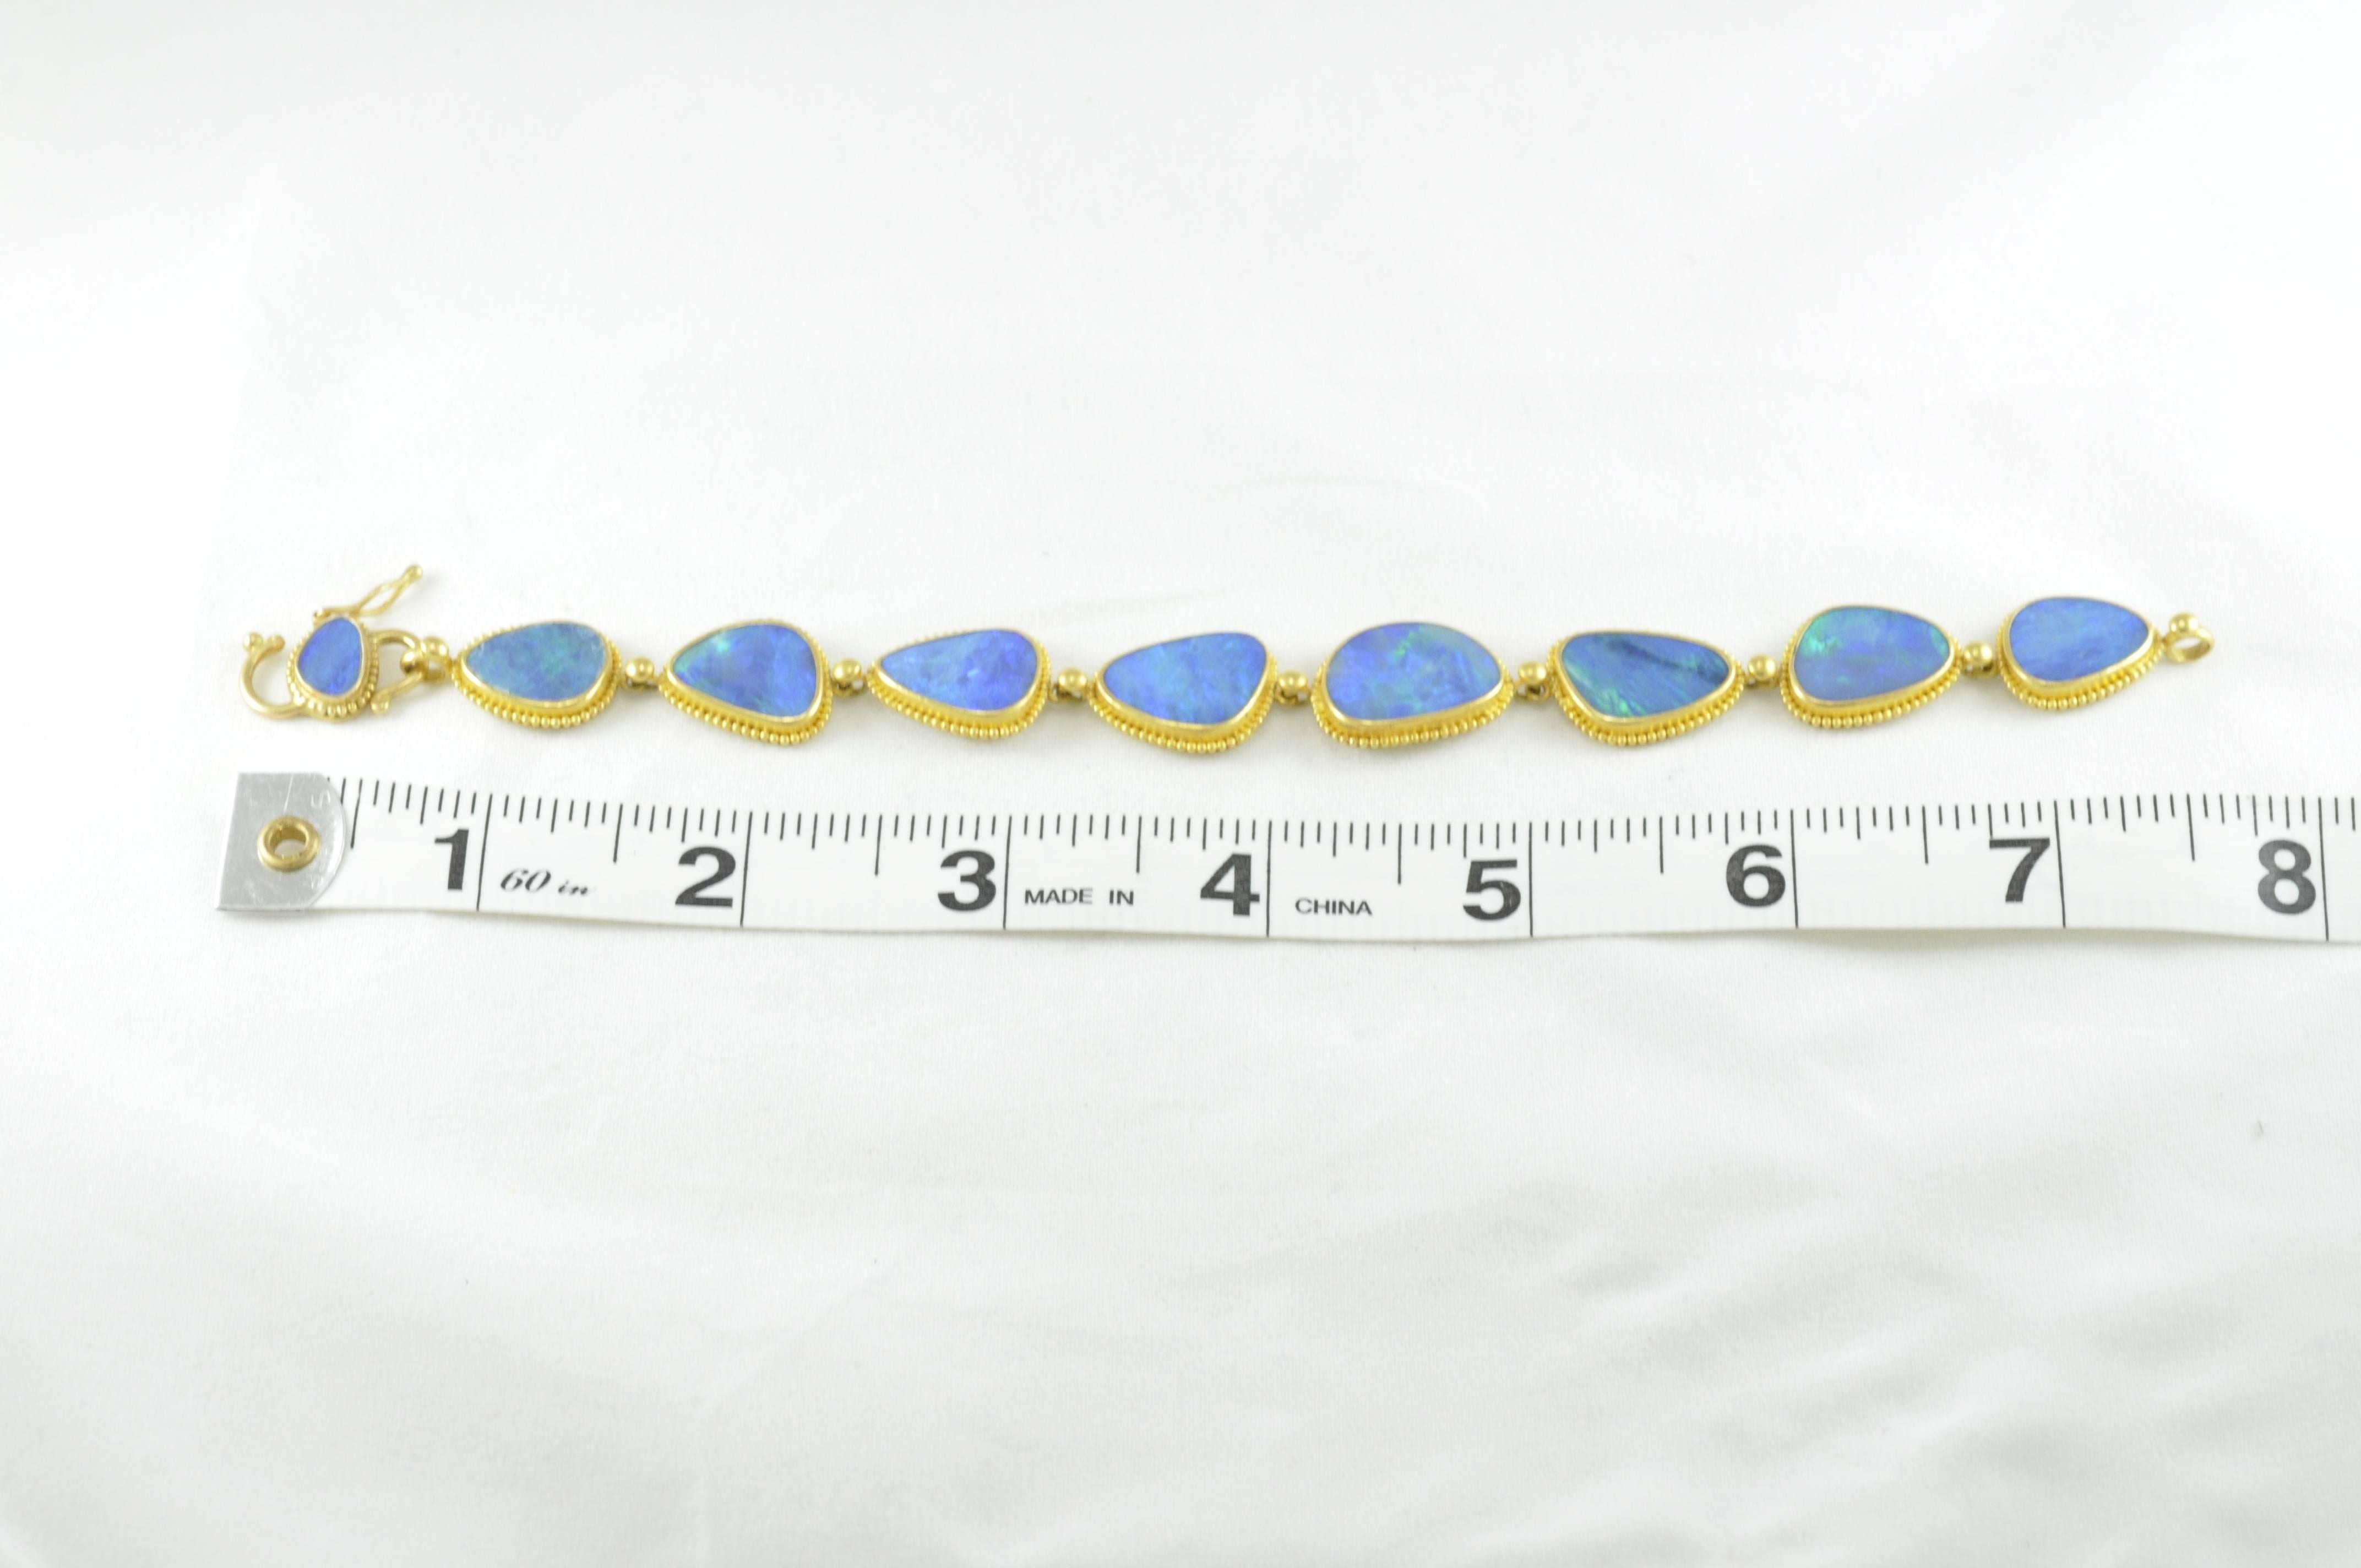 Carolyn Tyler 22k Gold 46ctw Boulder Australian Opal Doublet Bracelet.  7.5 inches long.  Width of the largest opal piece is .75 inch.  Granulation around the boulder opals.  